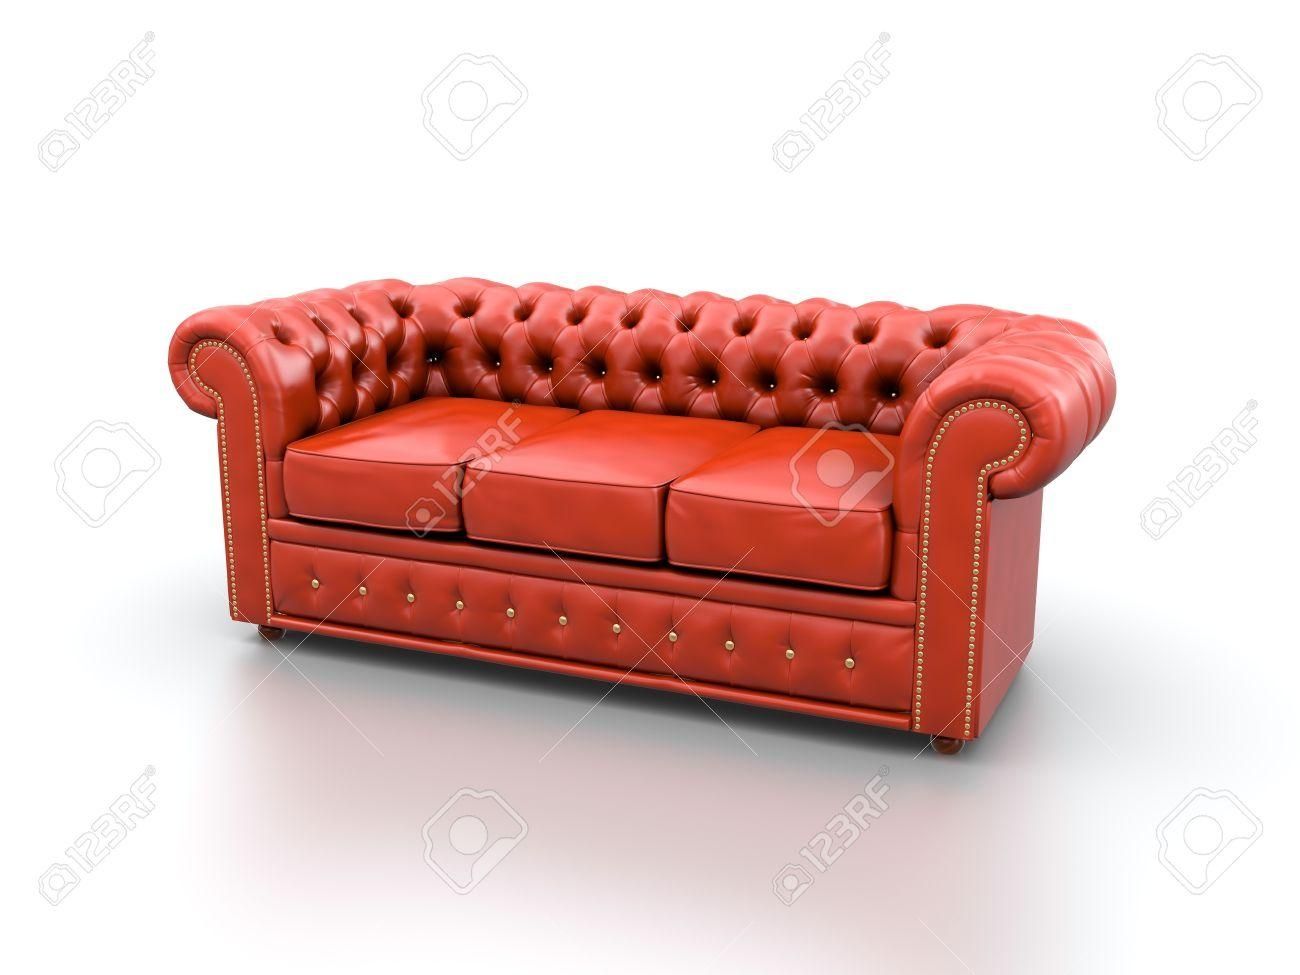 Chesterfield Sofa Stock Photos (View 15 of 20)